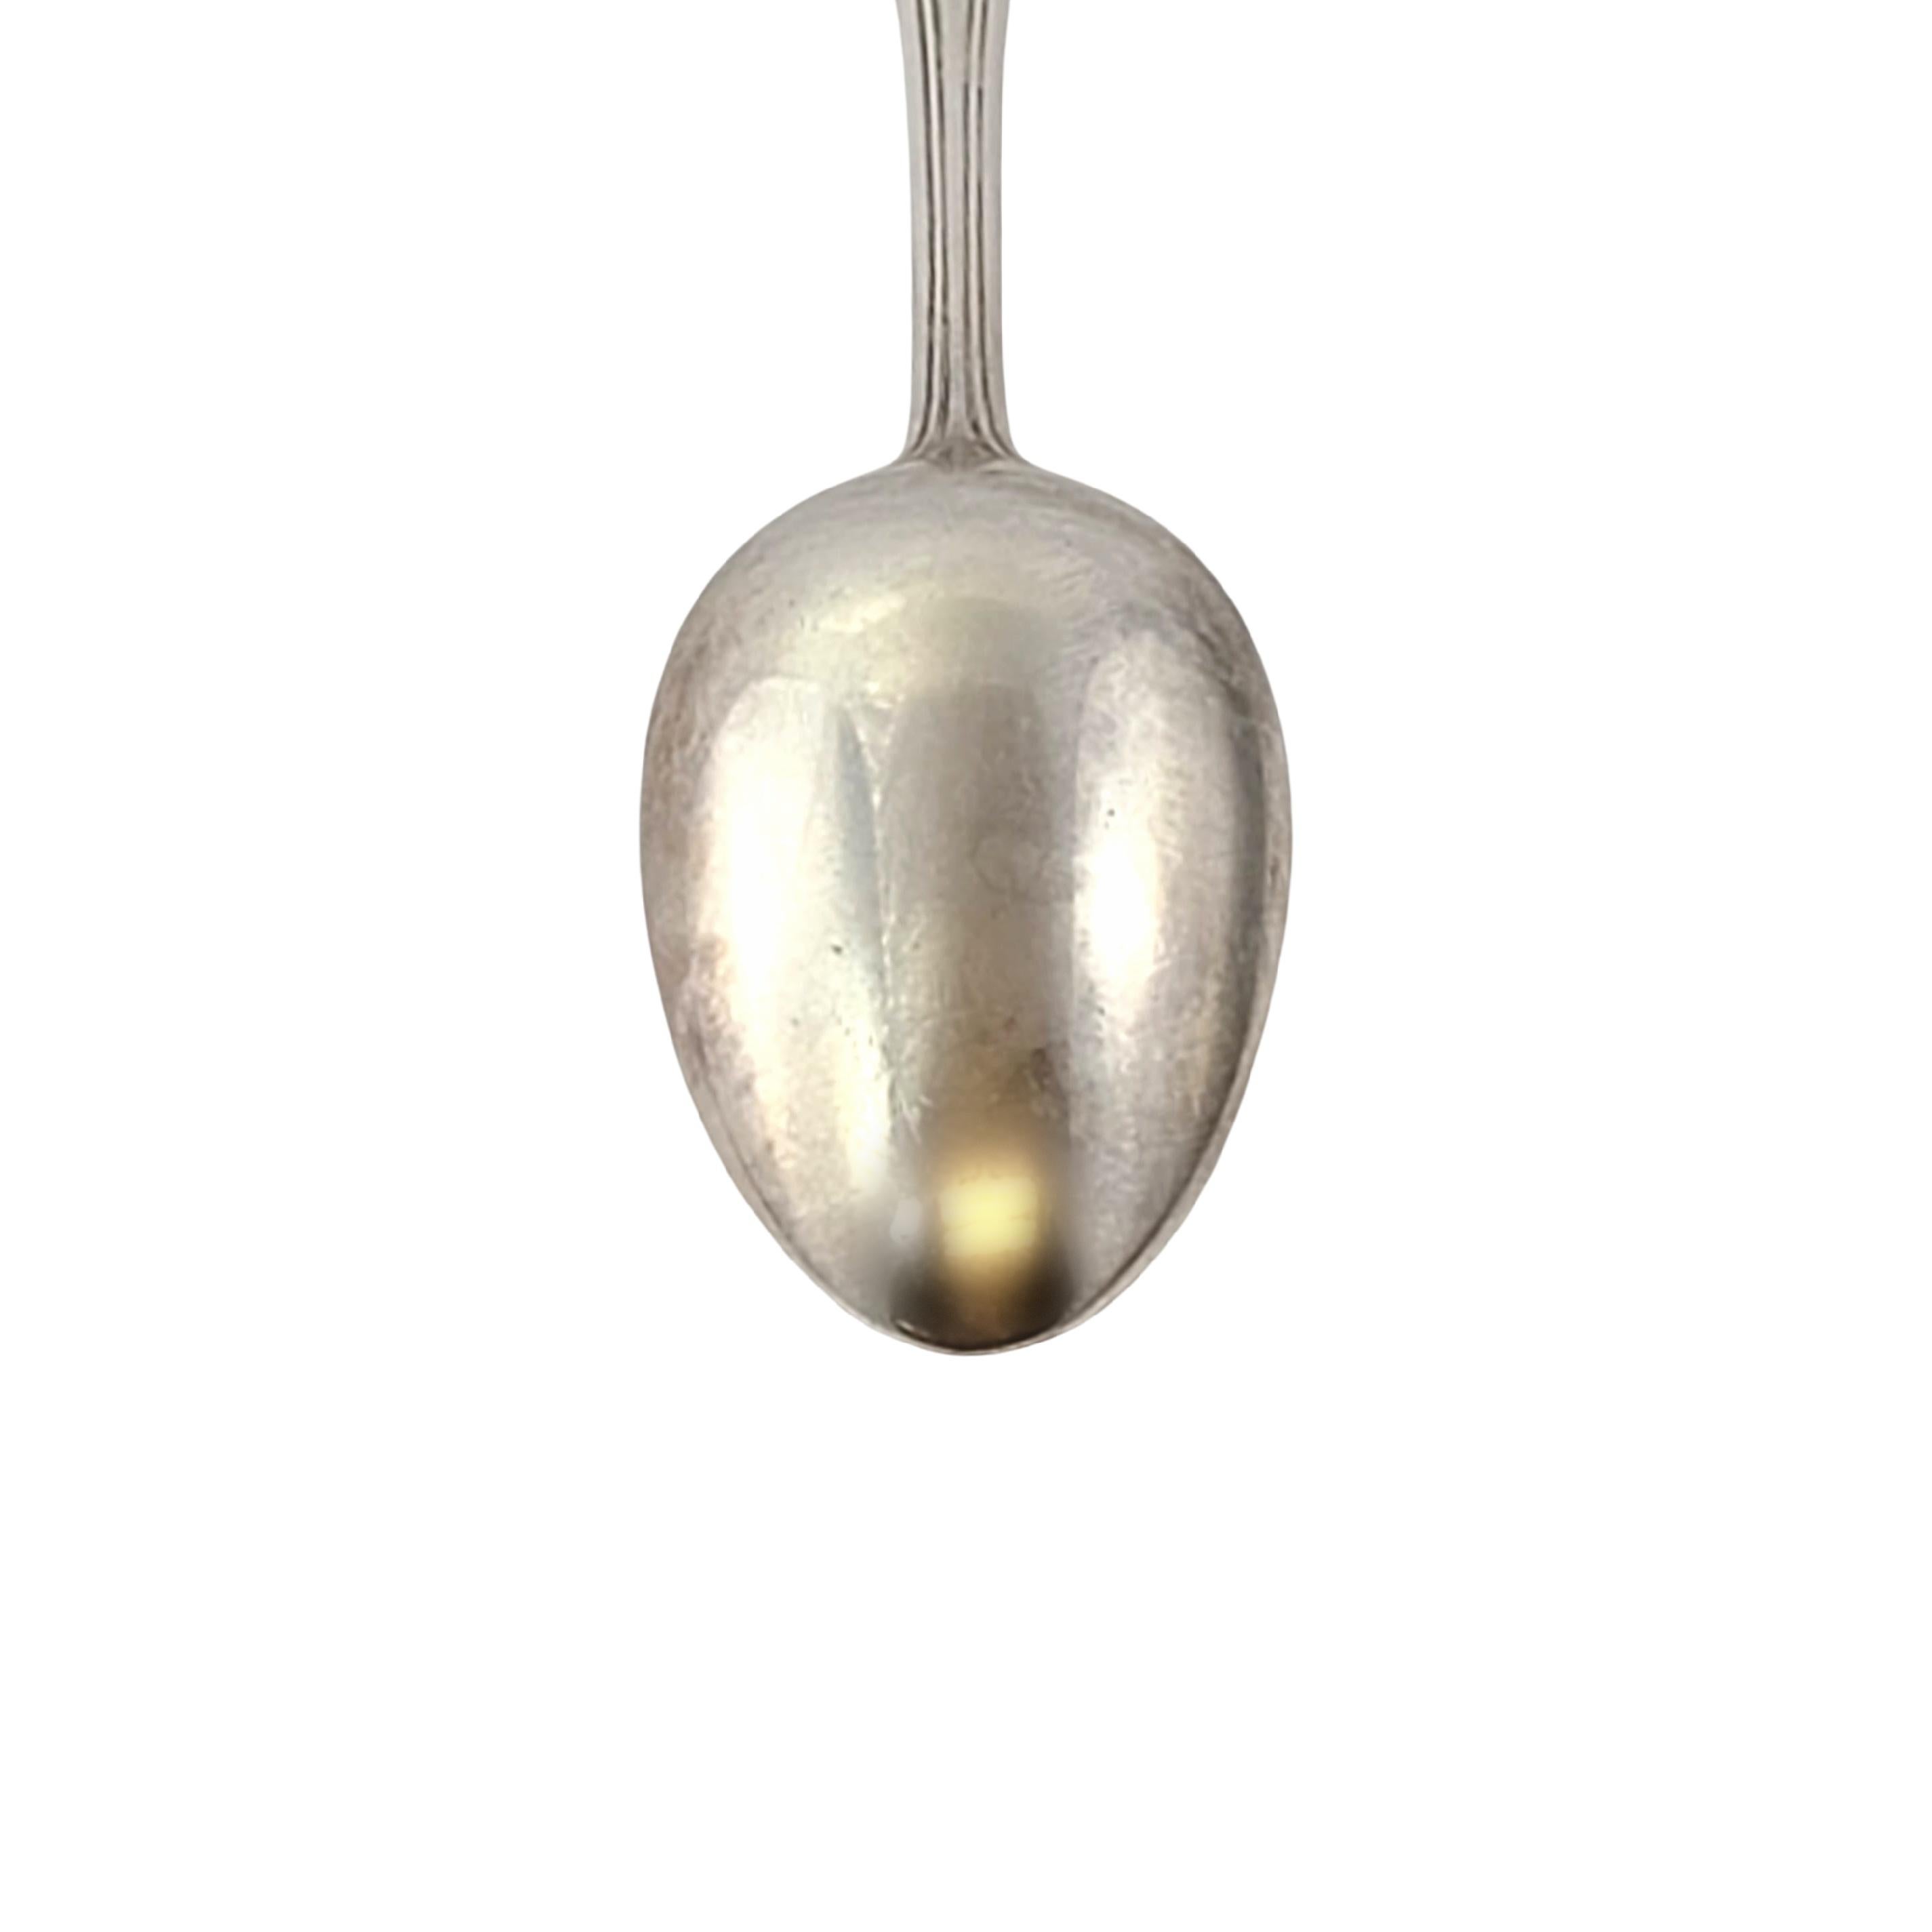 Women's or Men's Christofle France Albi Silver Plated Medicine/Invalid Feeder Spoon